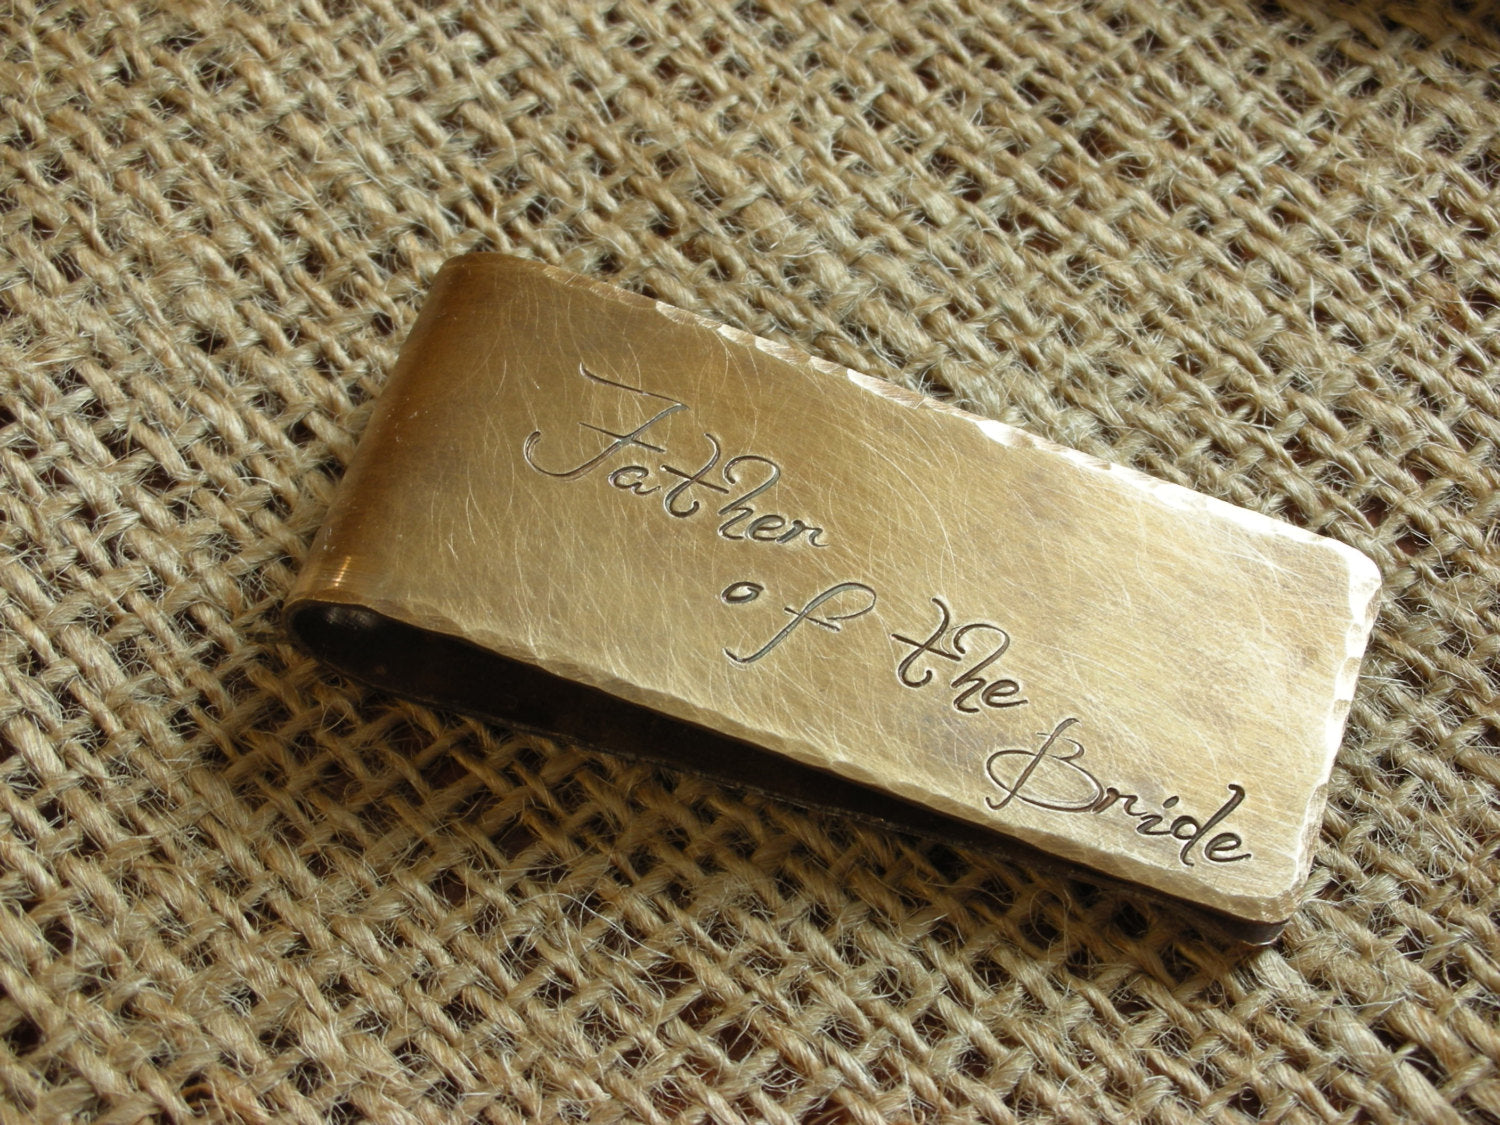 Father of the Bride Money Clip,Father of the Groom Money Clip,Father of the Bride Gift,Father of the Groom Gift,Custom Money Clip,Wedding